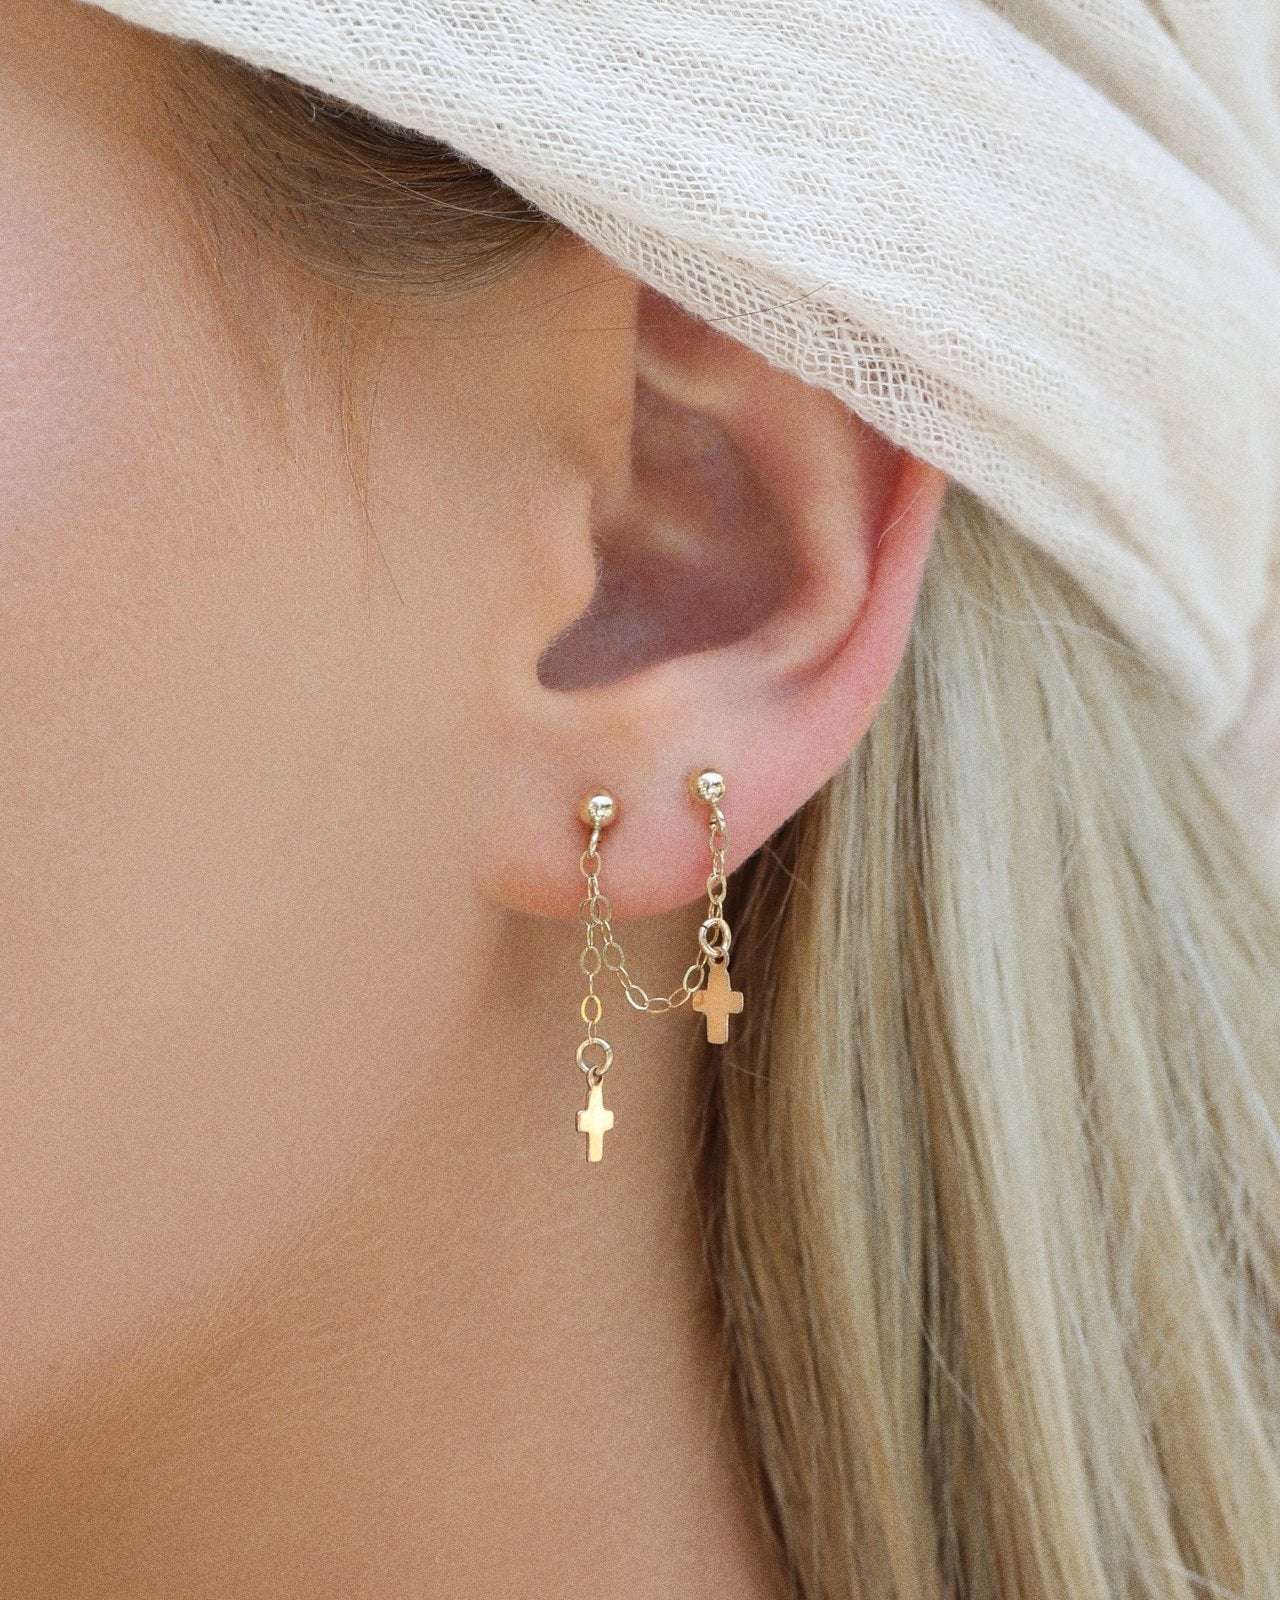 Solid 14k Gold Piercing Jewelry Designed By A Piercer, For Piercings –  Buddha Jewelry